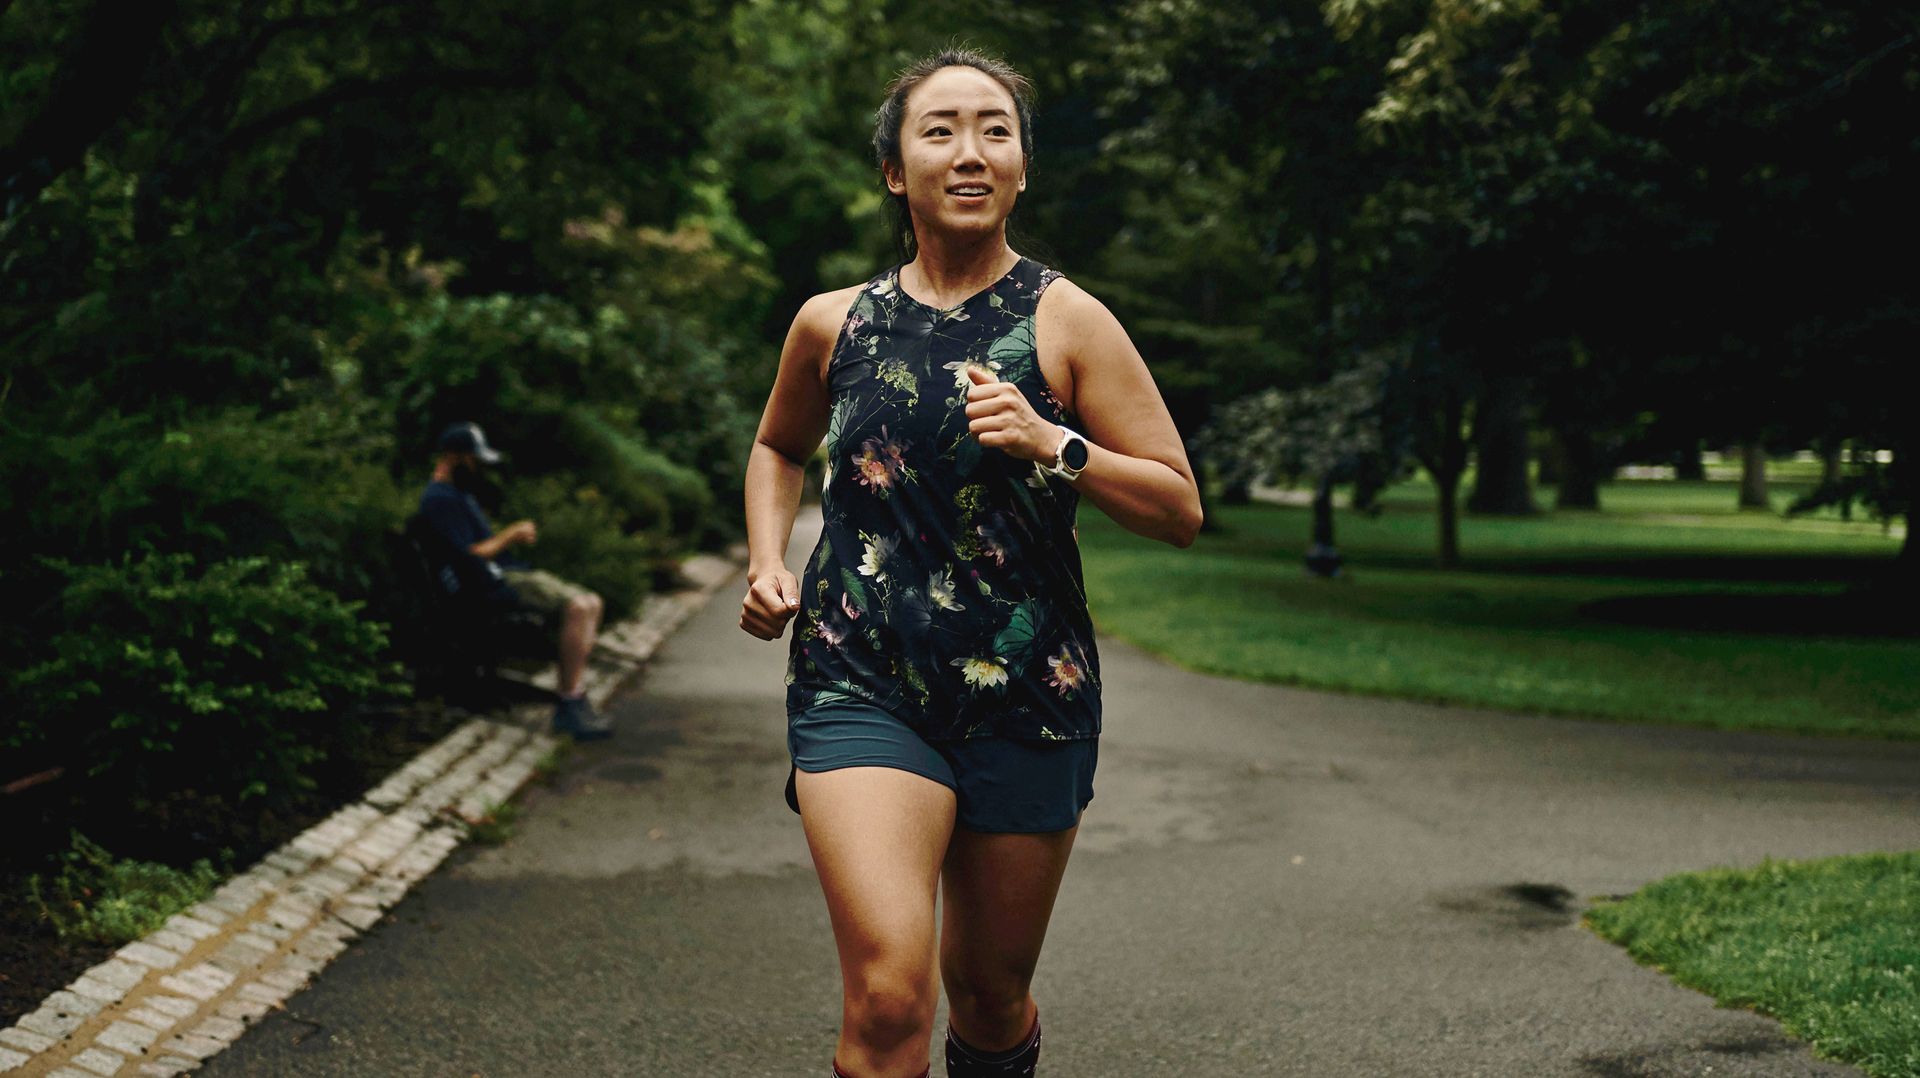 carolyn su running and stretching along her regular routes outside of boston in september 2020